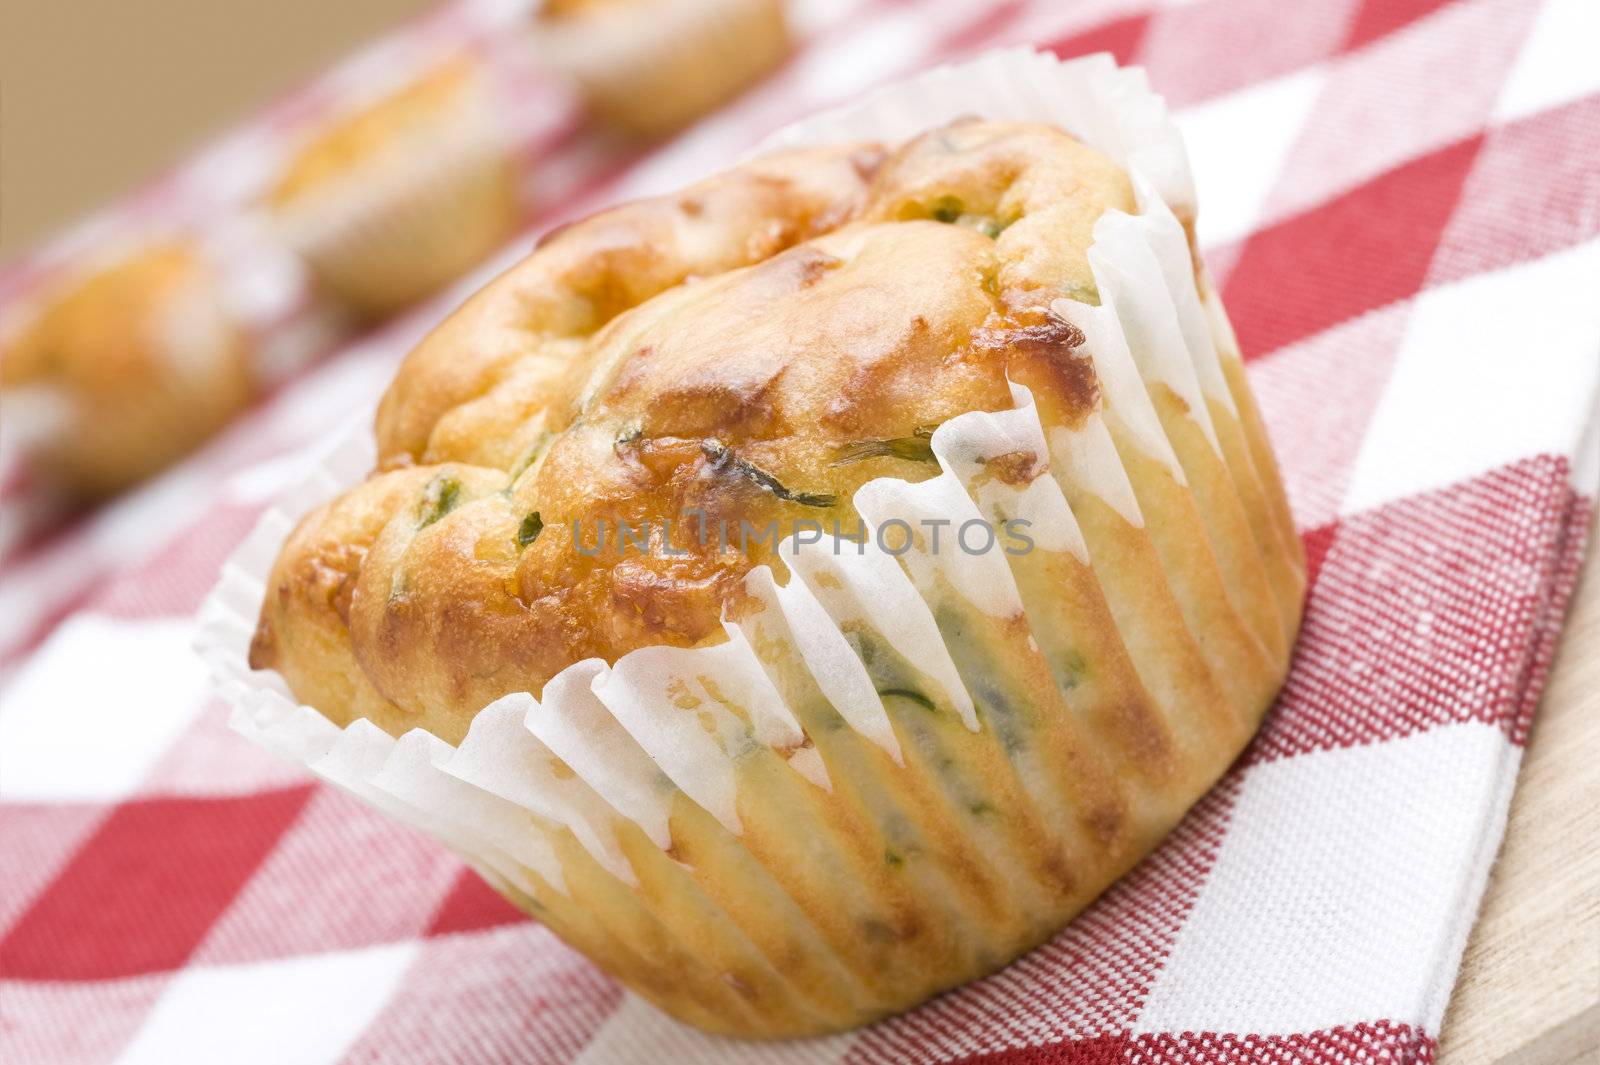 Freshly baked spinach and cheese muffins by tish1